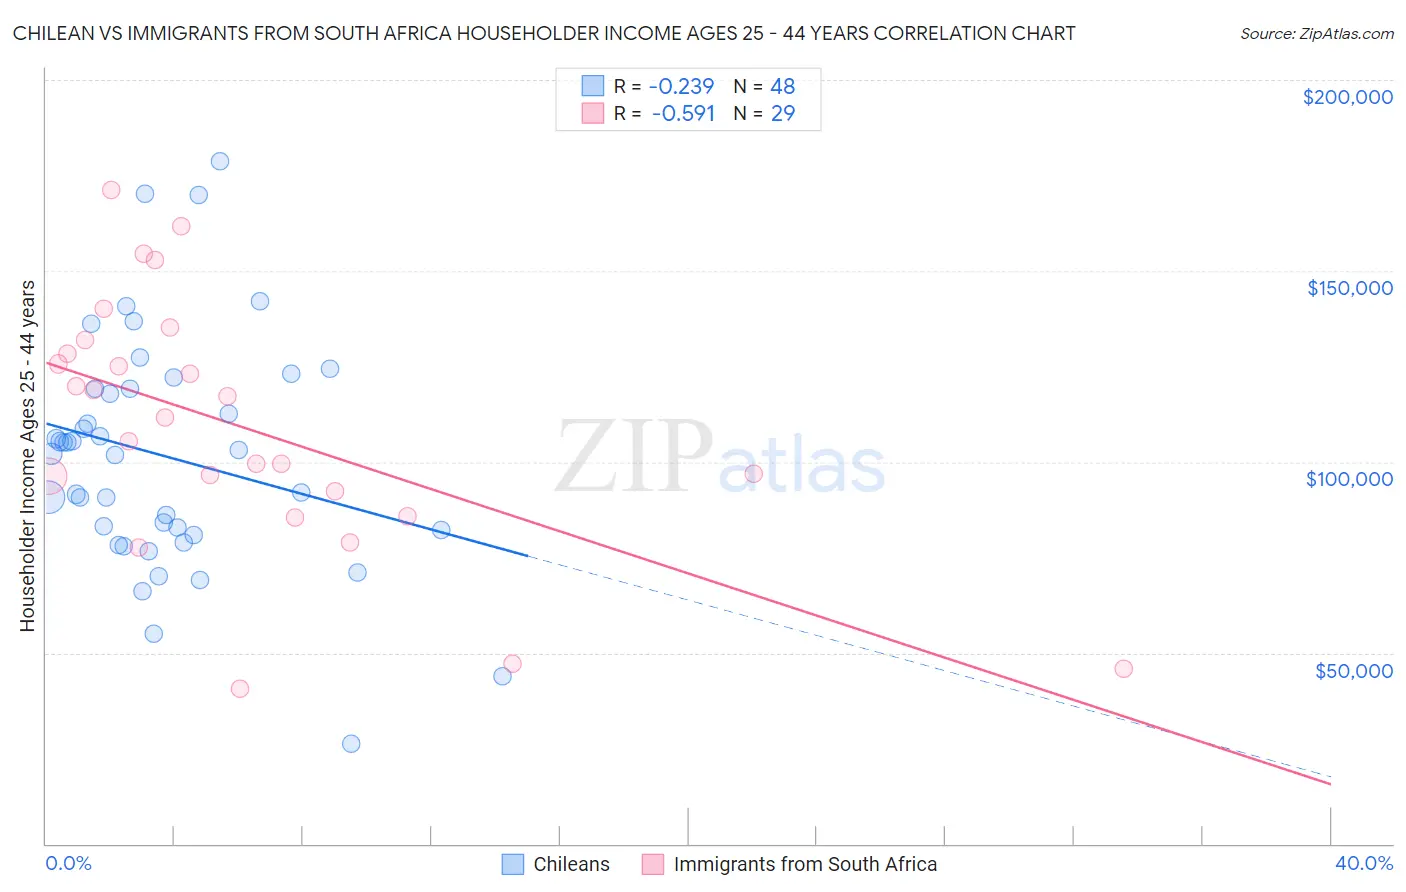 Chilean vs Immigrants from South Africa Householder Income Ages 25 - 44 years